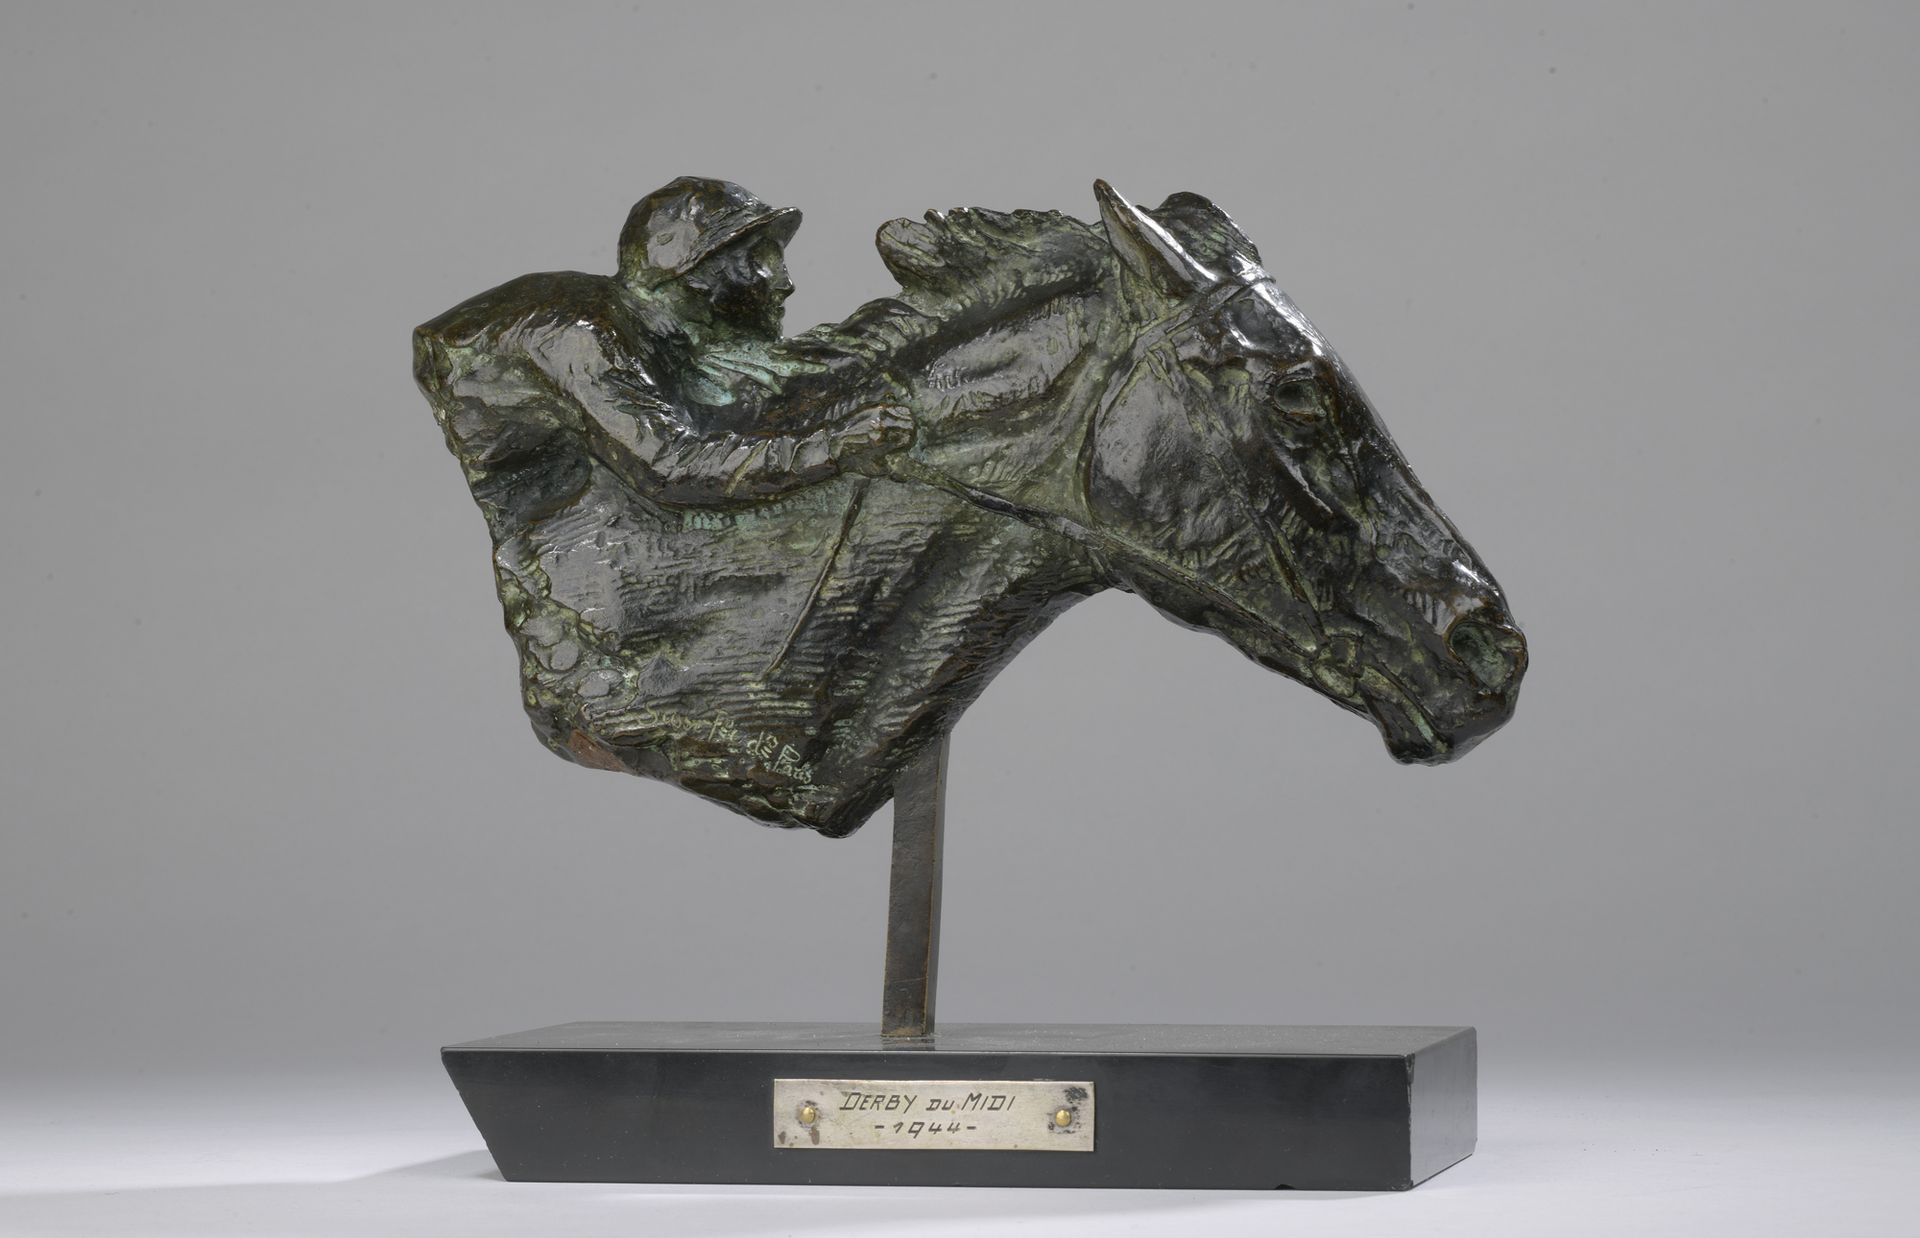 Null Roger GODCHAUX (1878-1958)

Derby du Midi, 1944

Bronze with a brown-green &hellip;